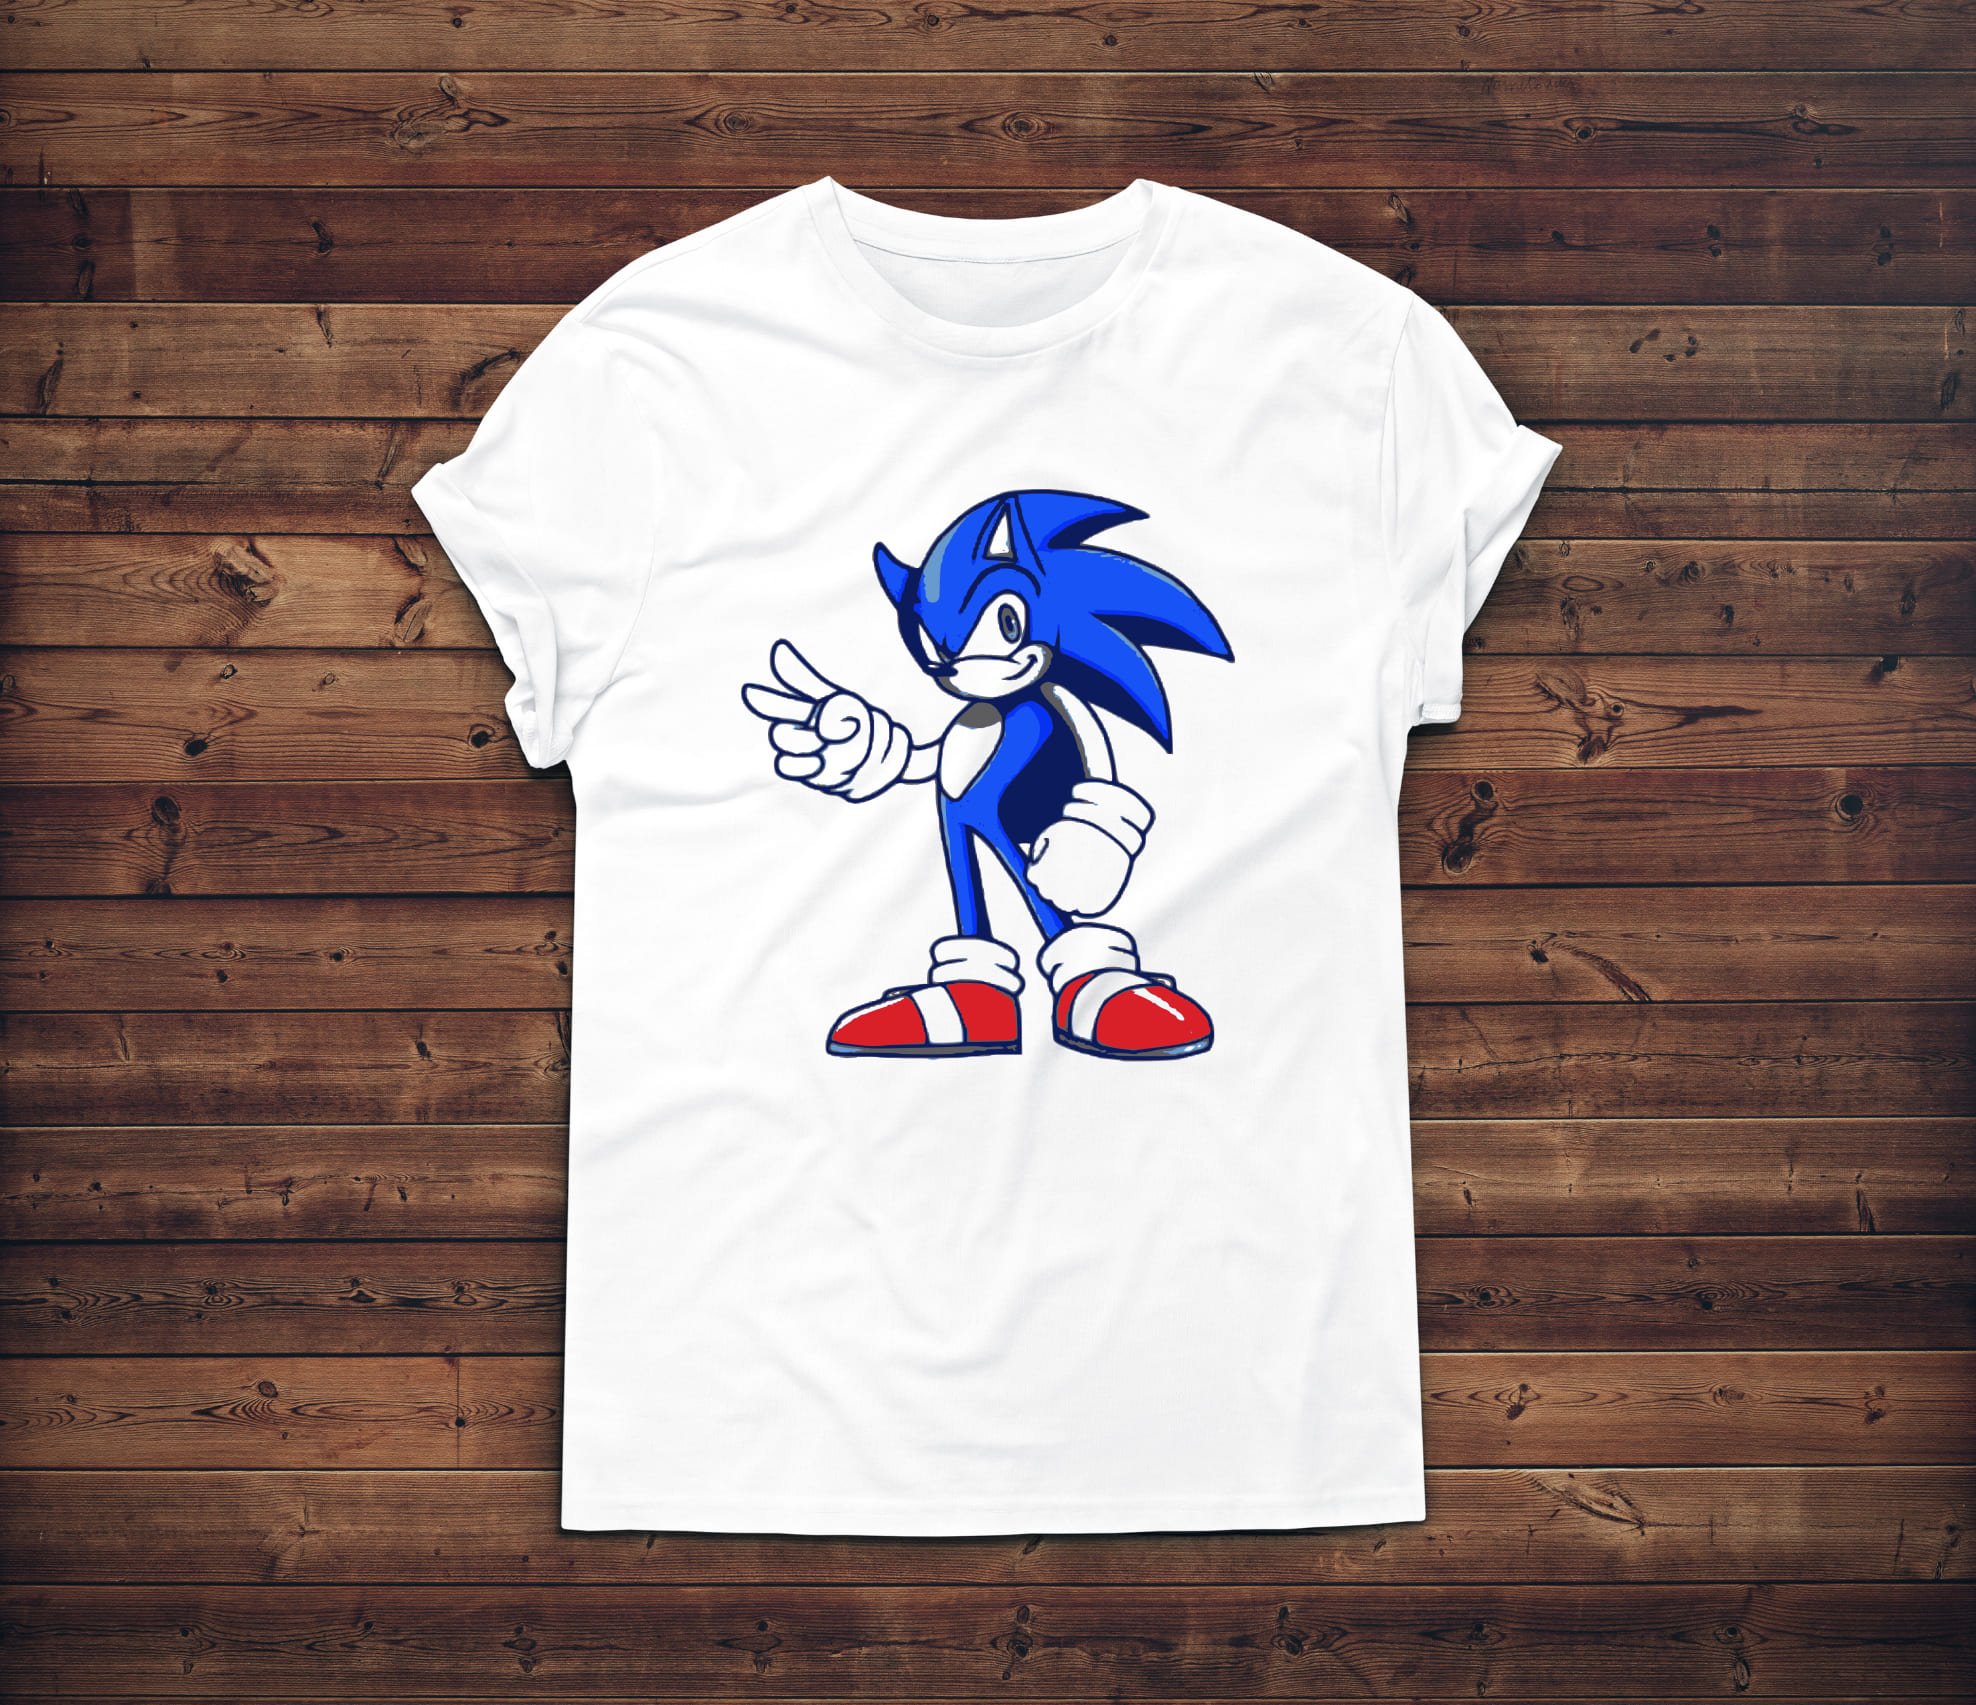 Thin blue Sonic on the t-shirt.